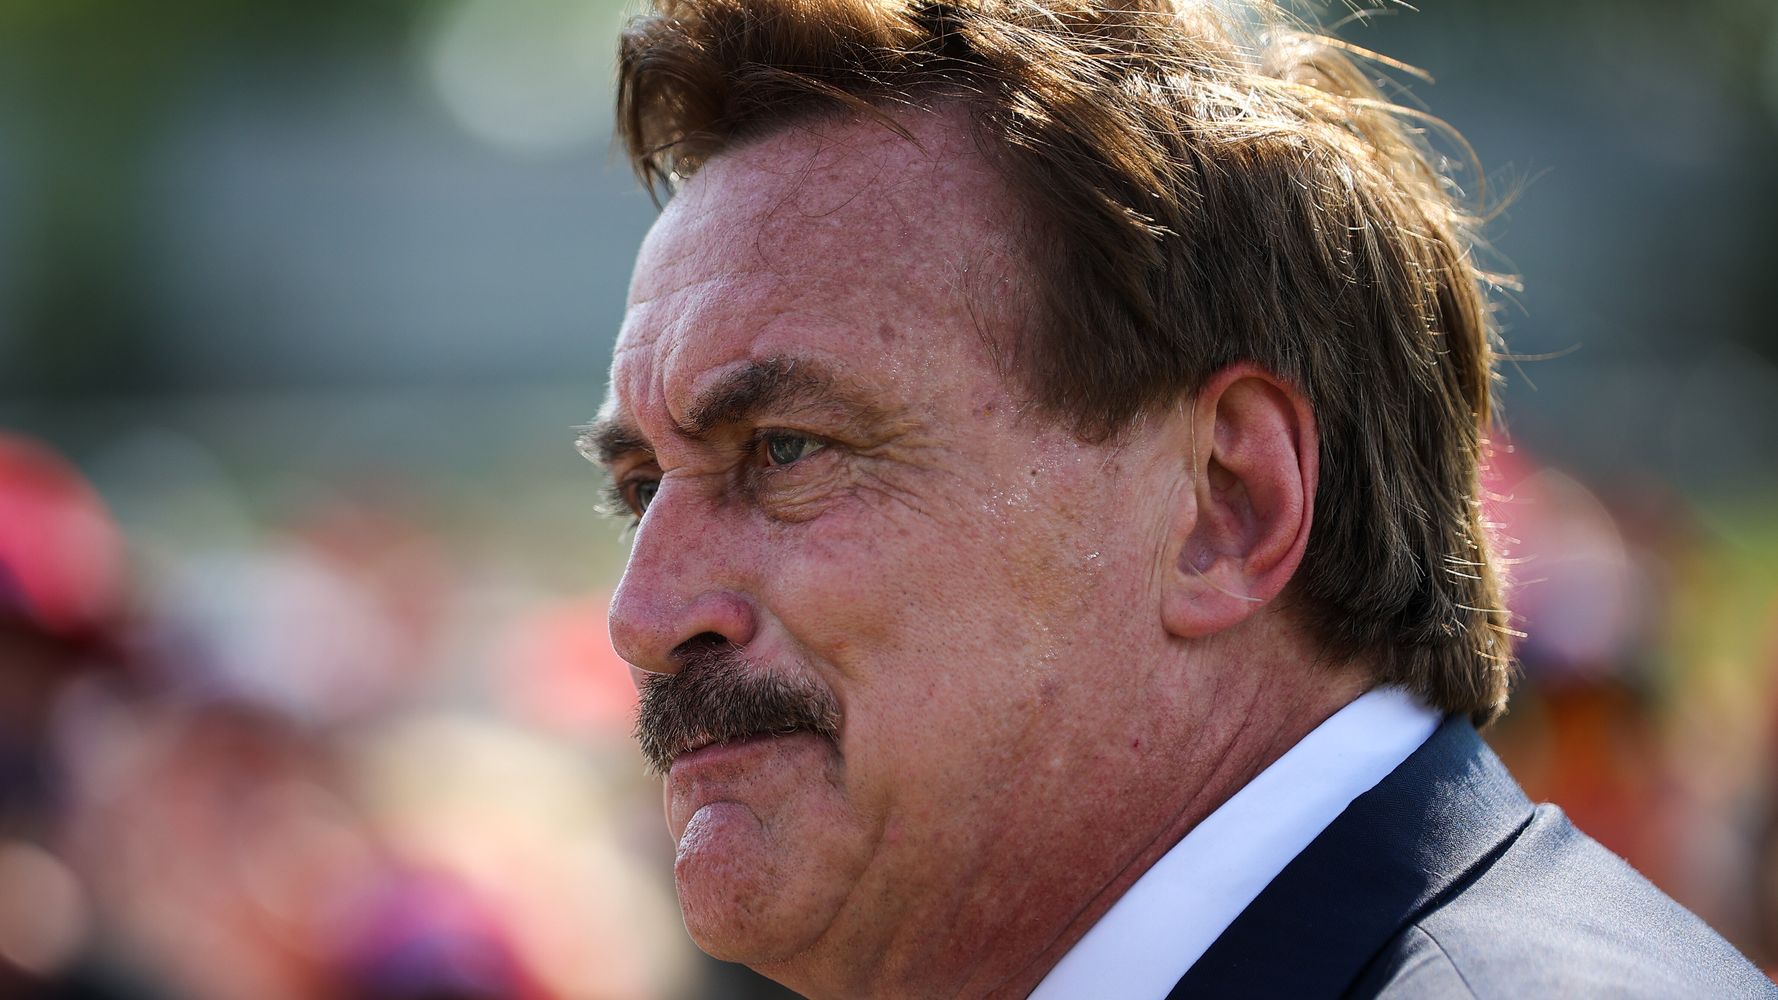 Mike Lindell's 'Attack' Story Gets Weirder: Now He Says It Was An Aggressive Selfie Seeker